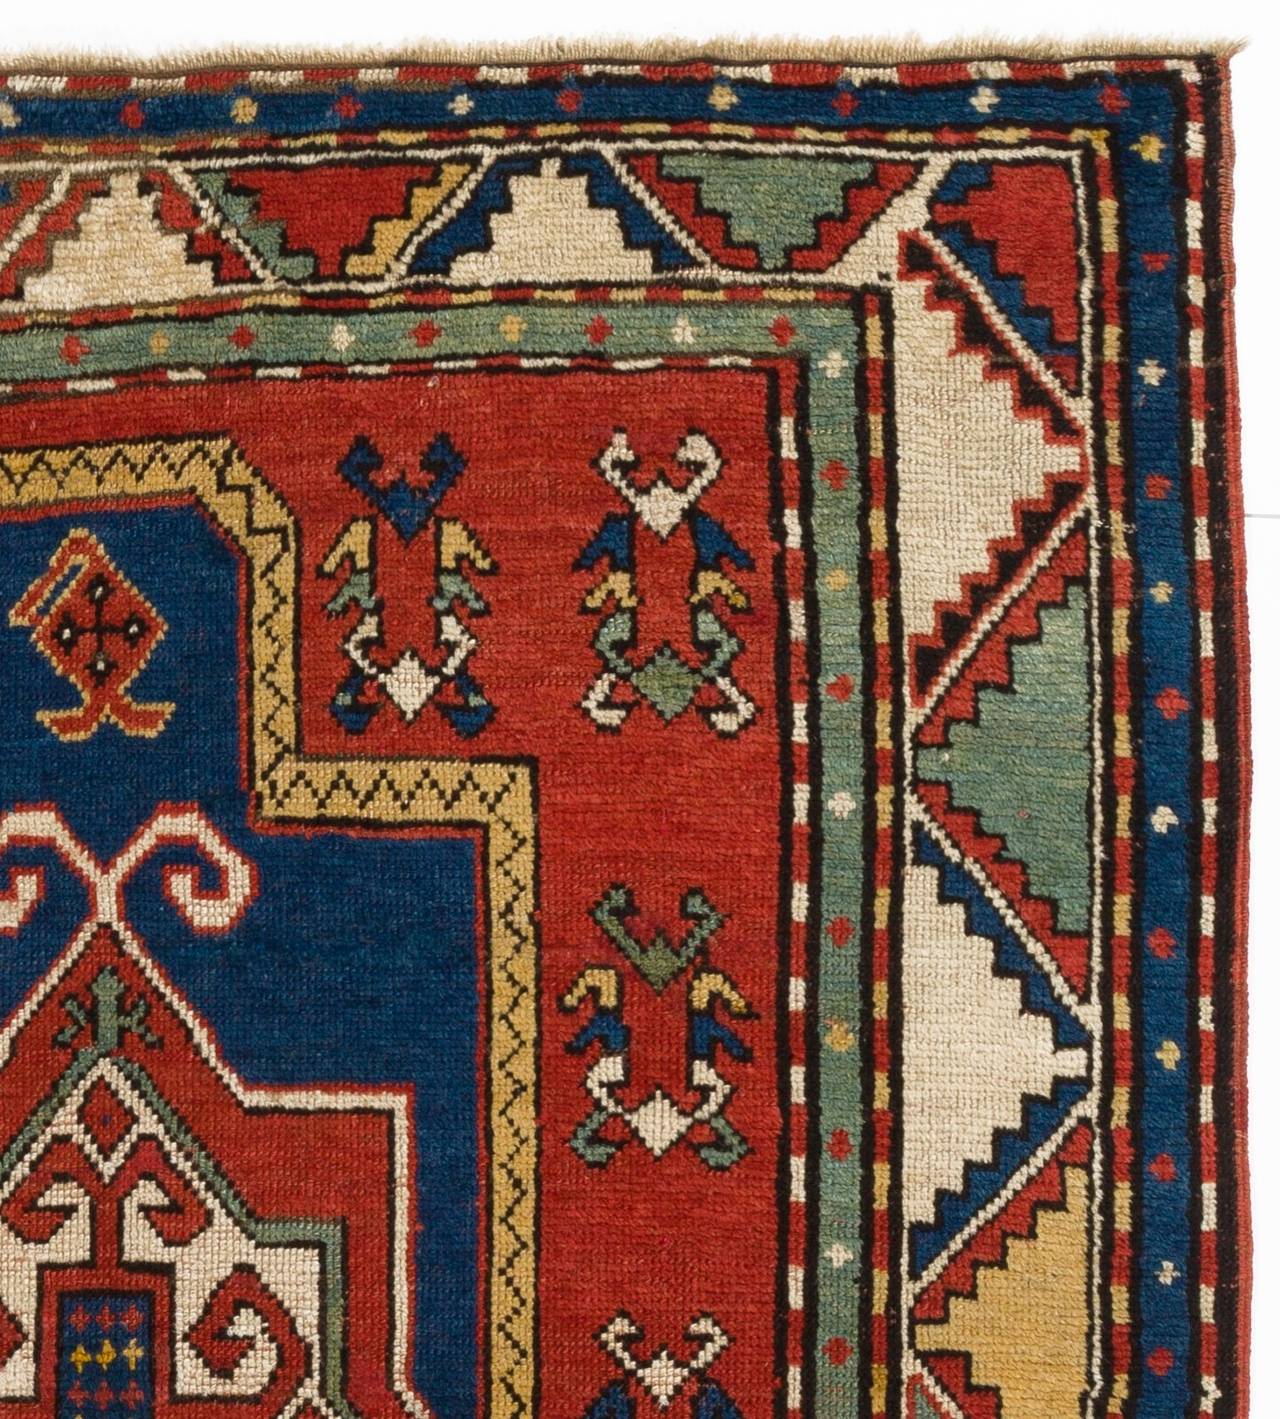 An outstanding Kazak prayer rug with glowing natural colors and a well-balanced geometric design including a madder red and ivory shield on an indigo niche framed with a colorful zig zag border and alternating mint green and indigo blue secondary